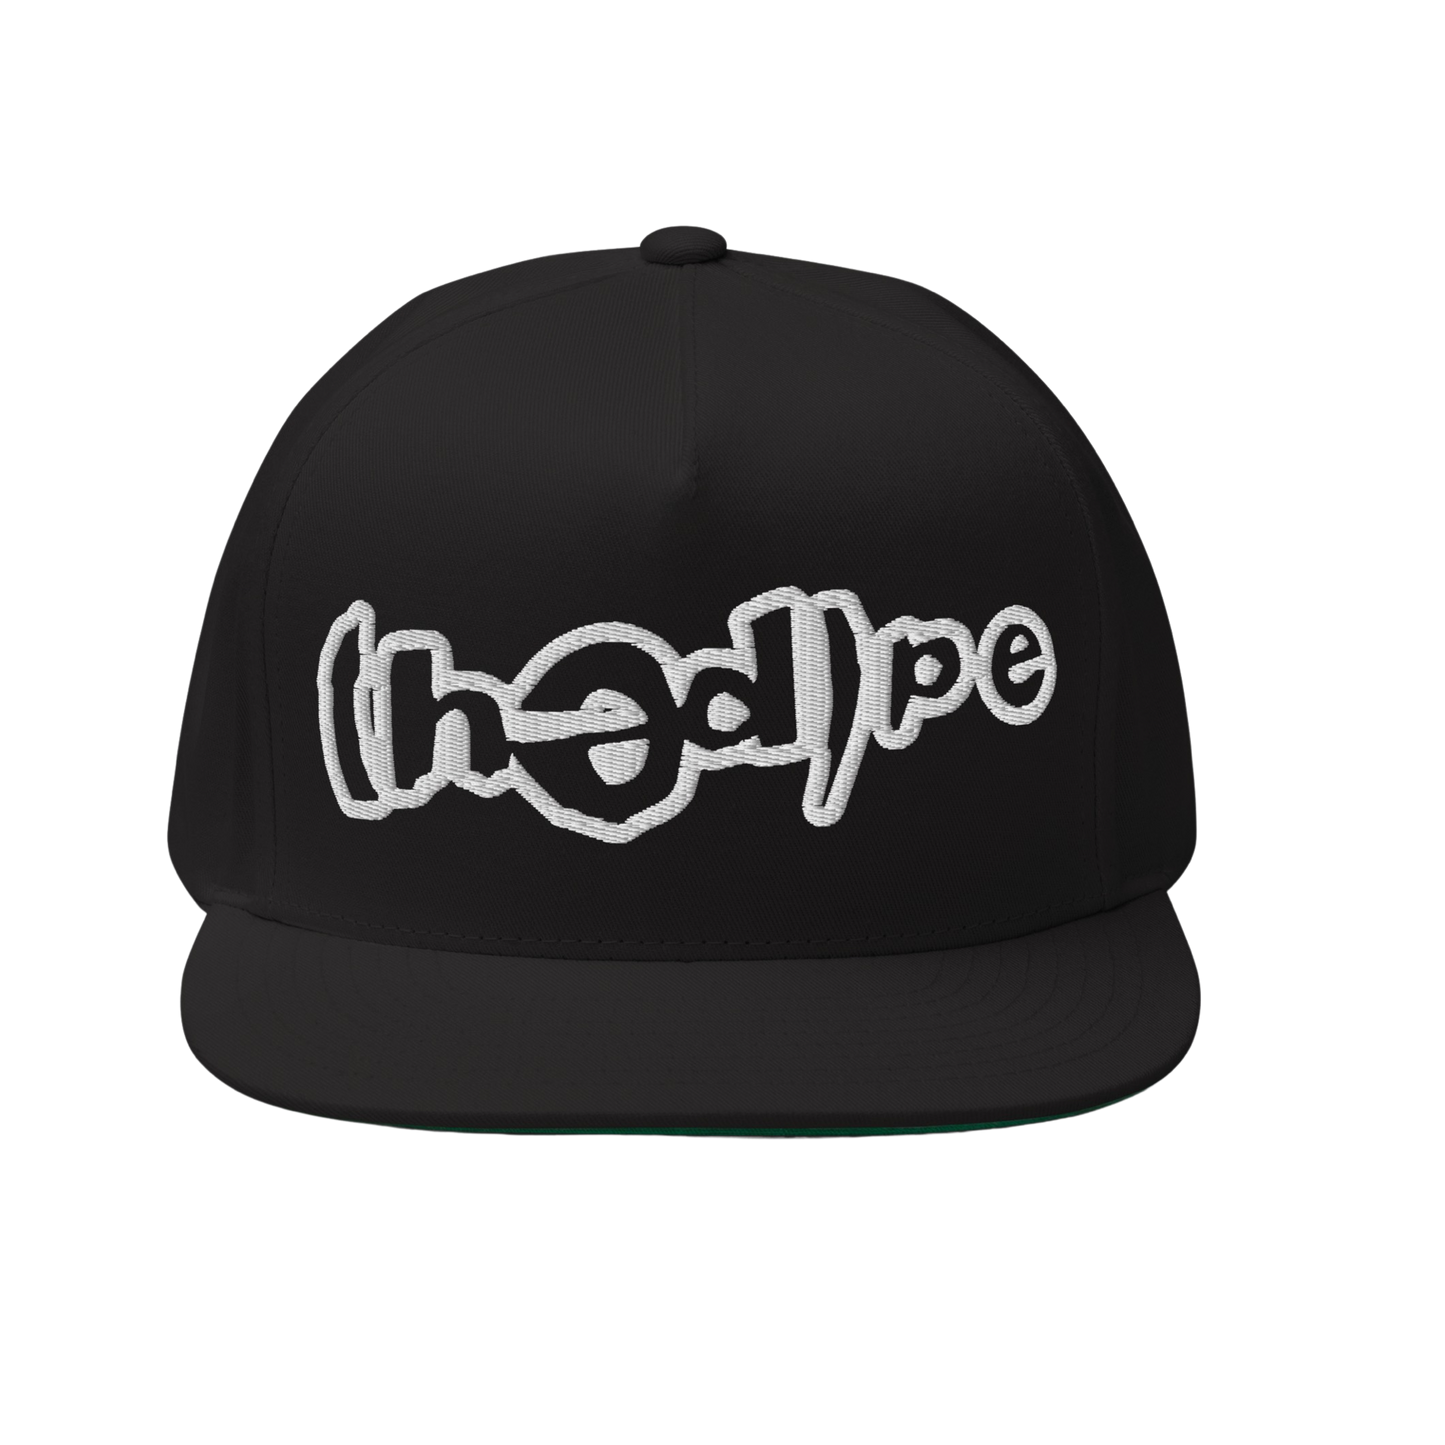 (Hed) P.E. Snapack